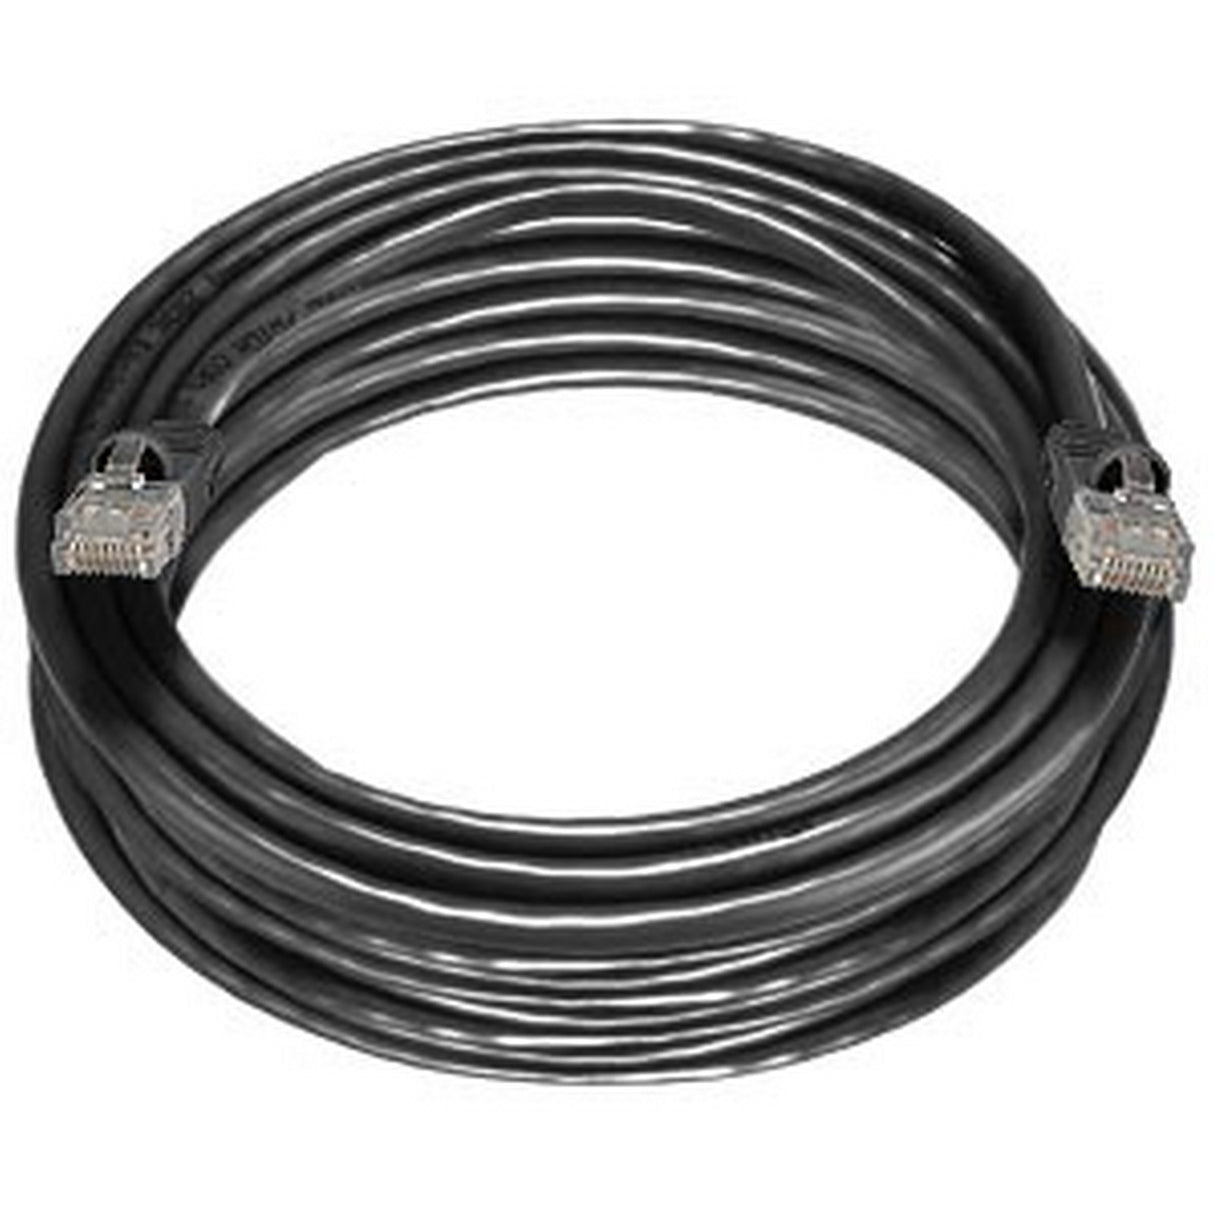 NTI CAT5-100-BLACK CAT5 Cable, Male to Male, Black, 100-Foot